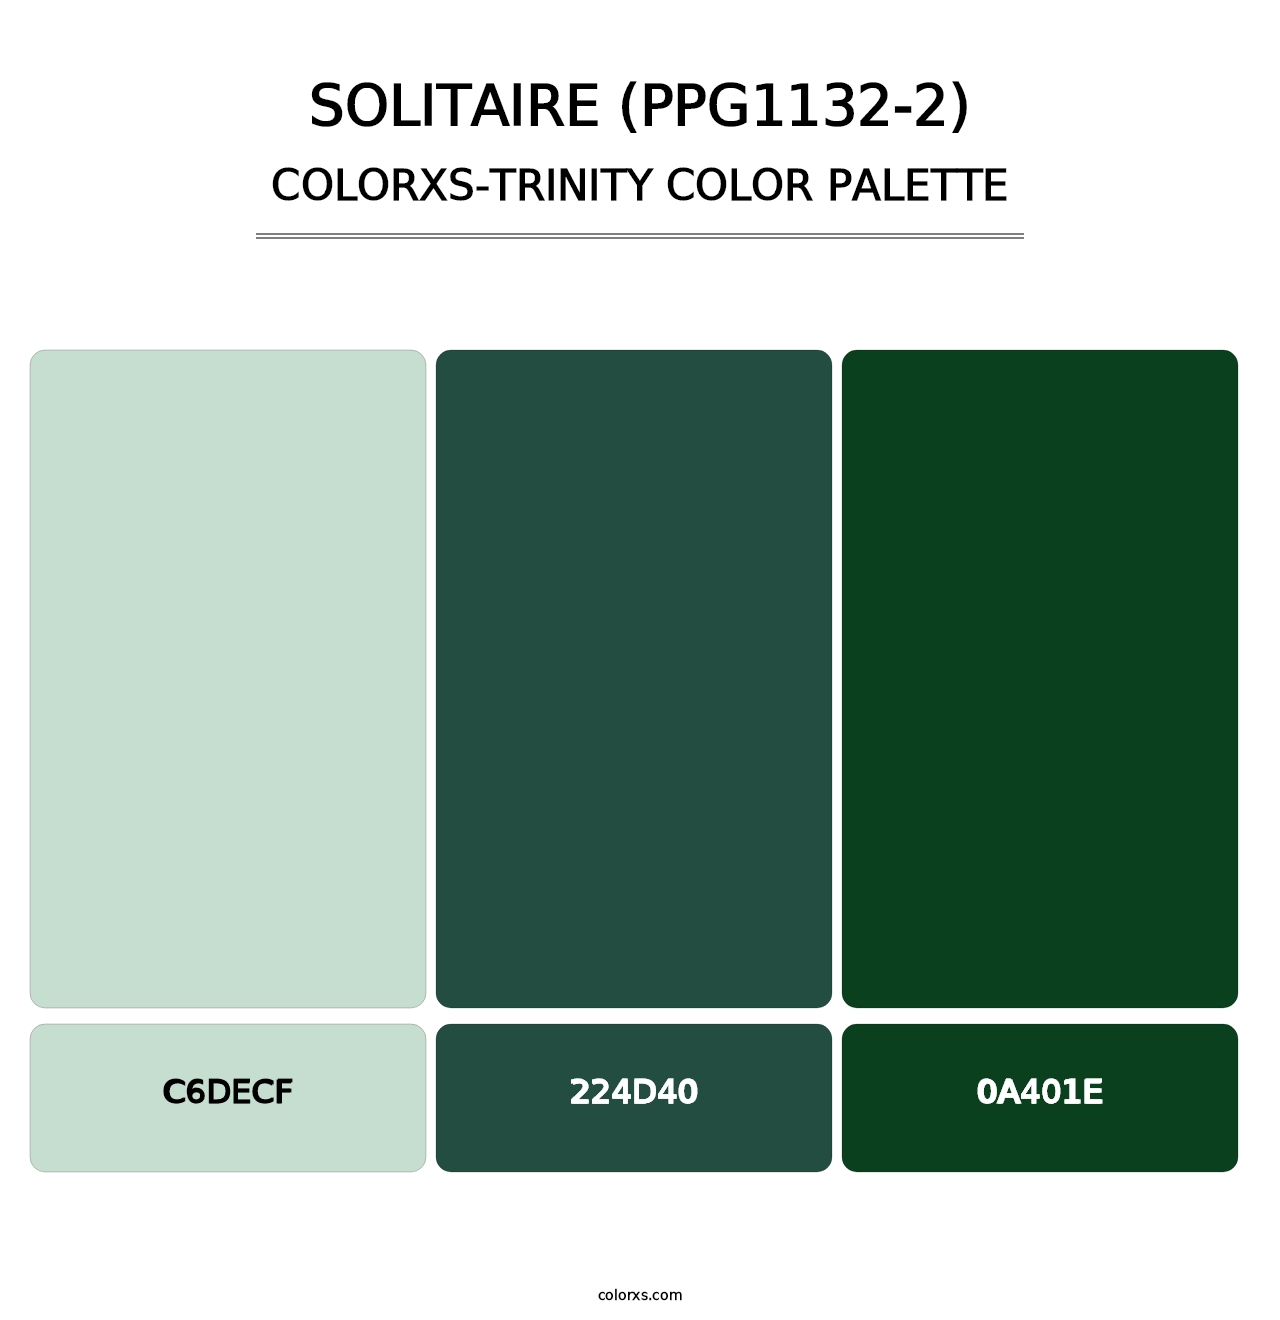 Solitaire (PPG1132-2) - Colorxs Trinity Palette